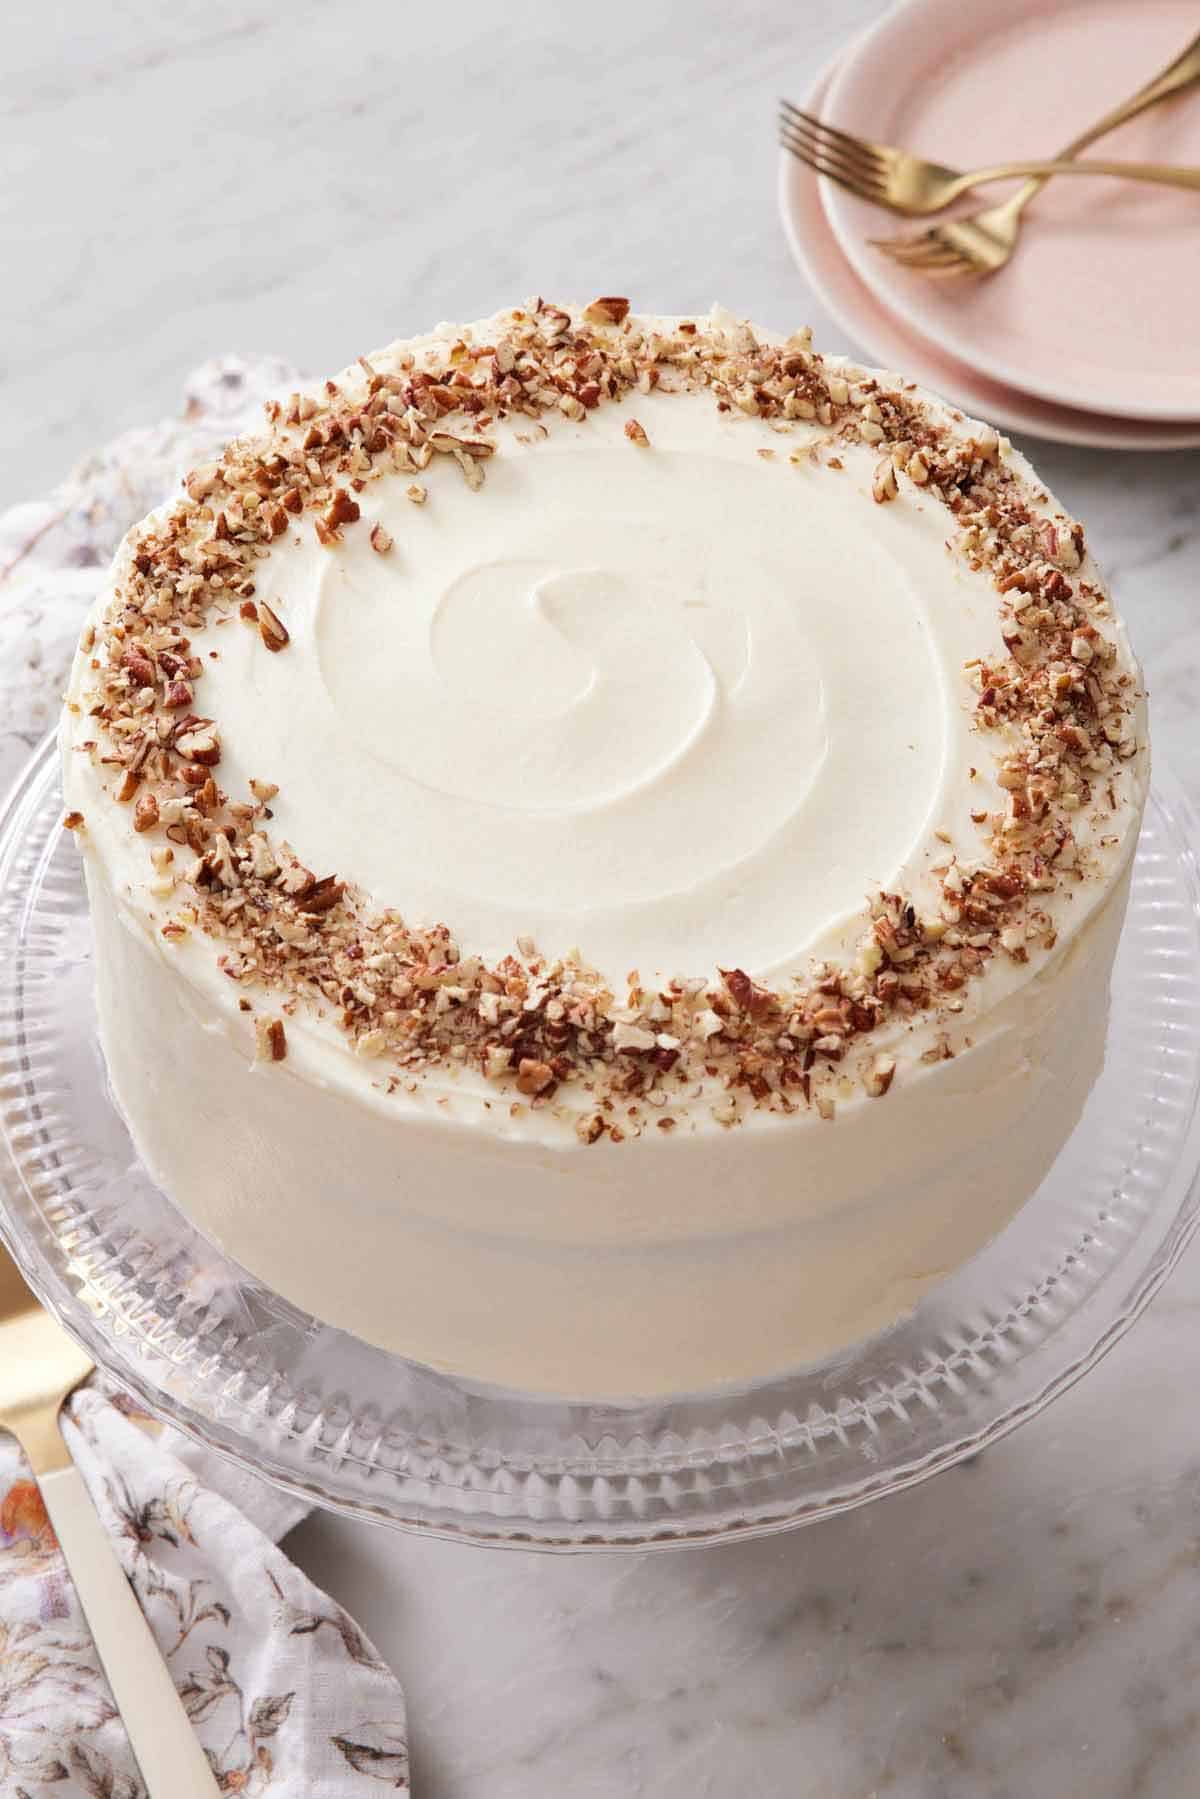 A clear cake stand with a hummingbird cake topped with chopped pecans.